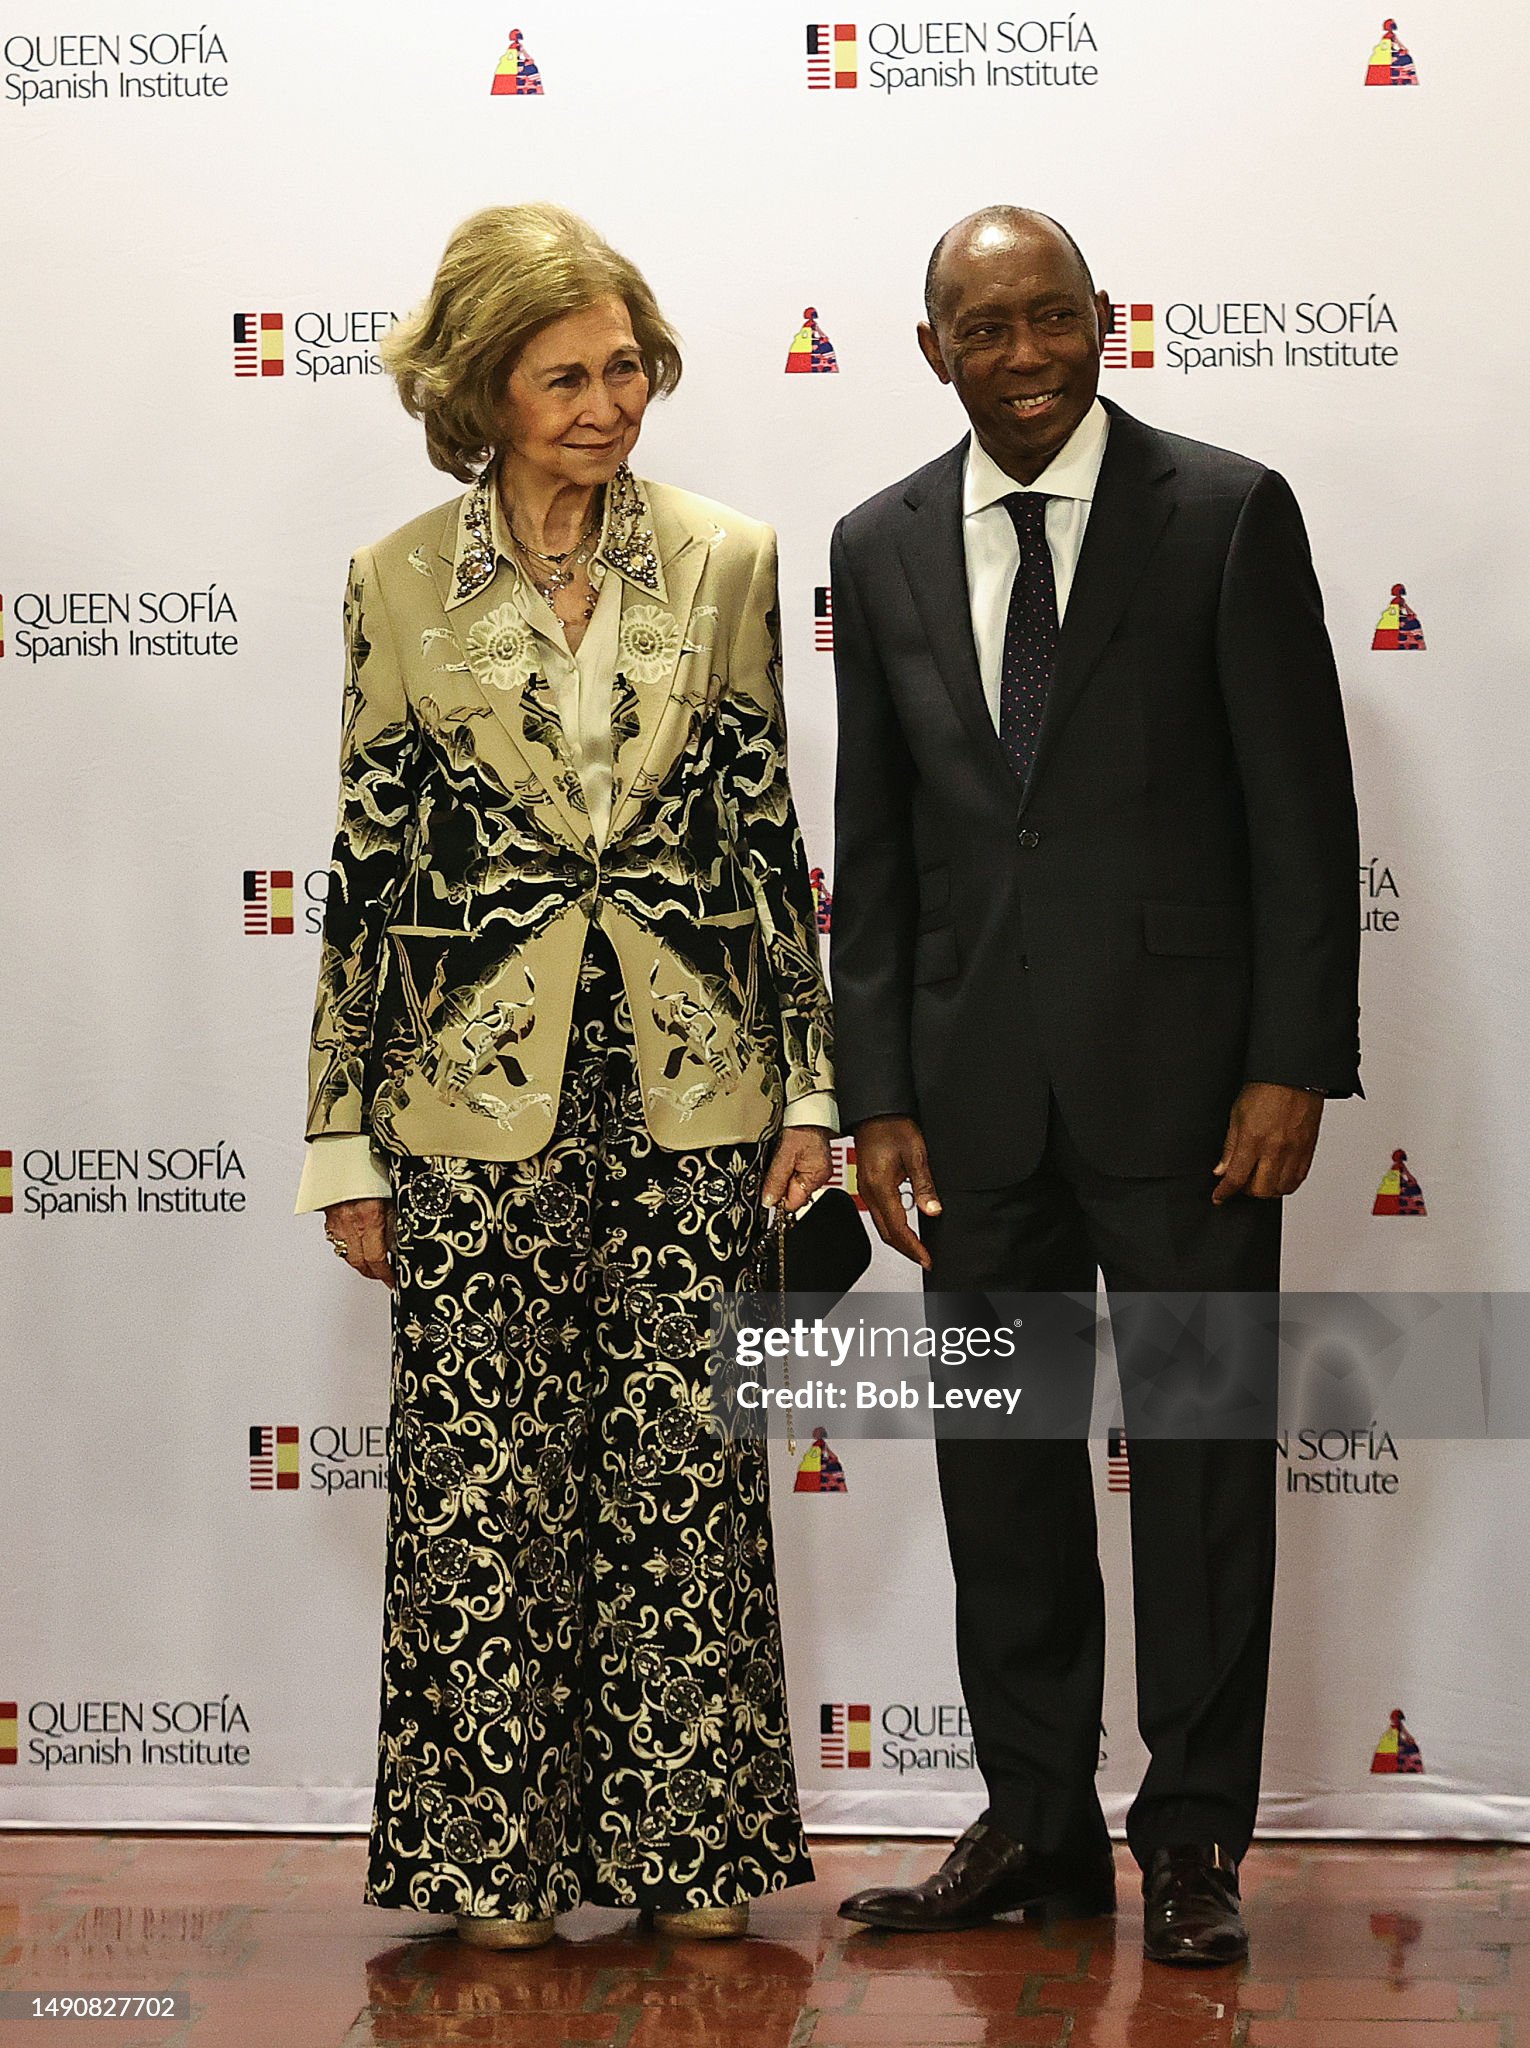 queen-sofia-of-spain-and-houston-mayor-sylvester-turner-at-julia-ideson-building-on-may-16.jpg